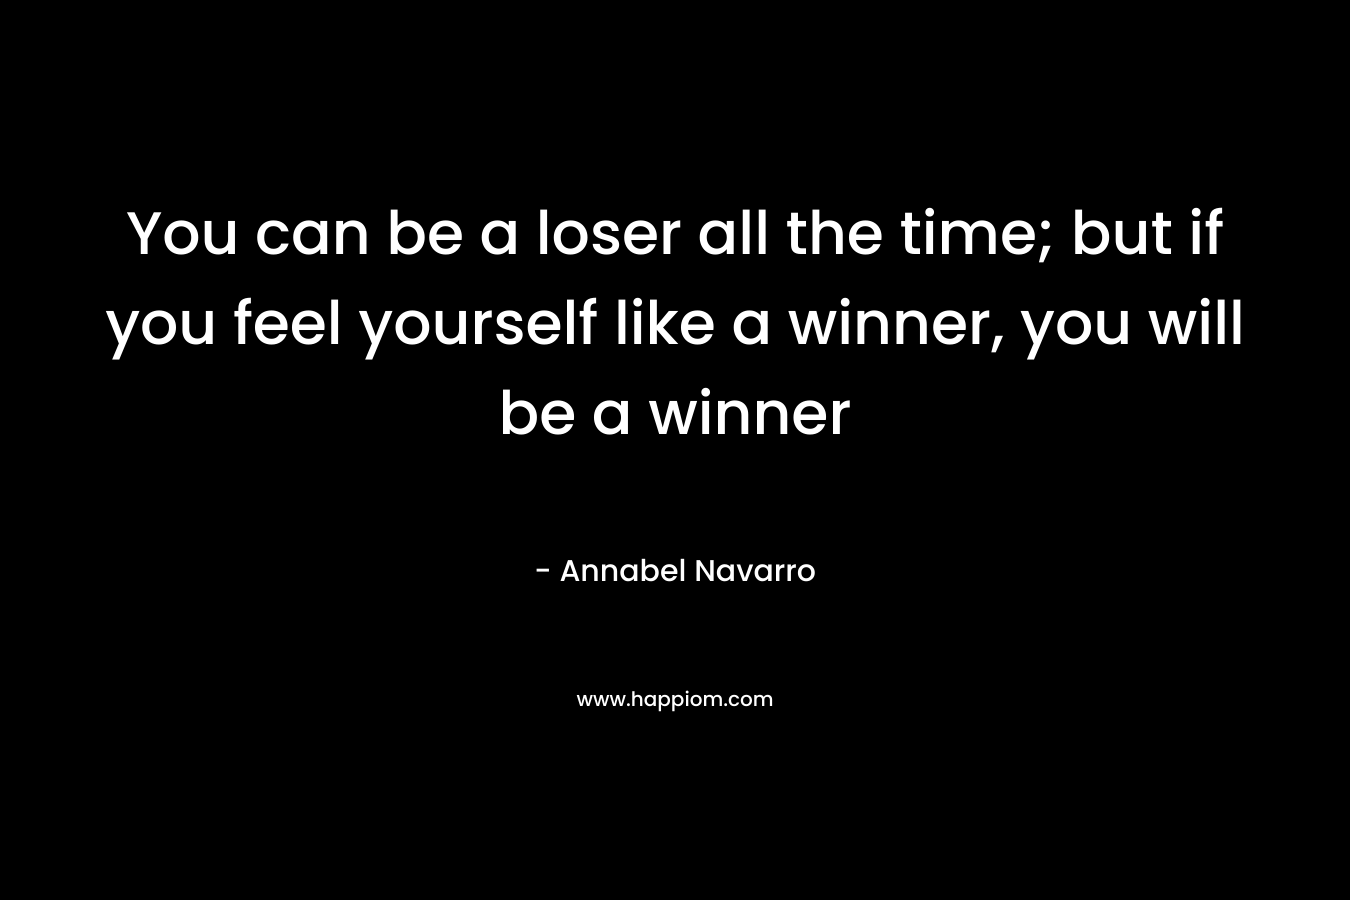 You can be a loser all the time; but if you feel yourself like a winner, you will be a winner – Annabel Navarro